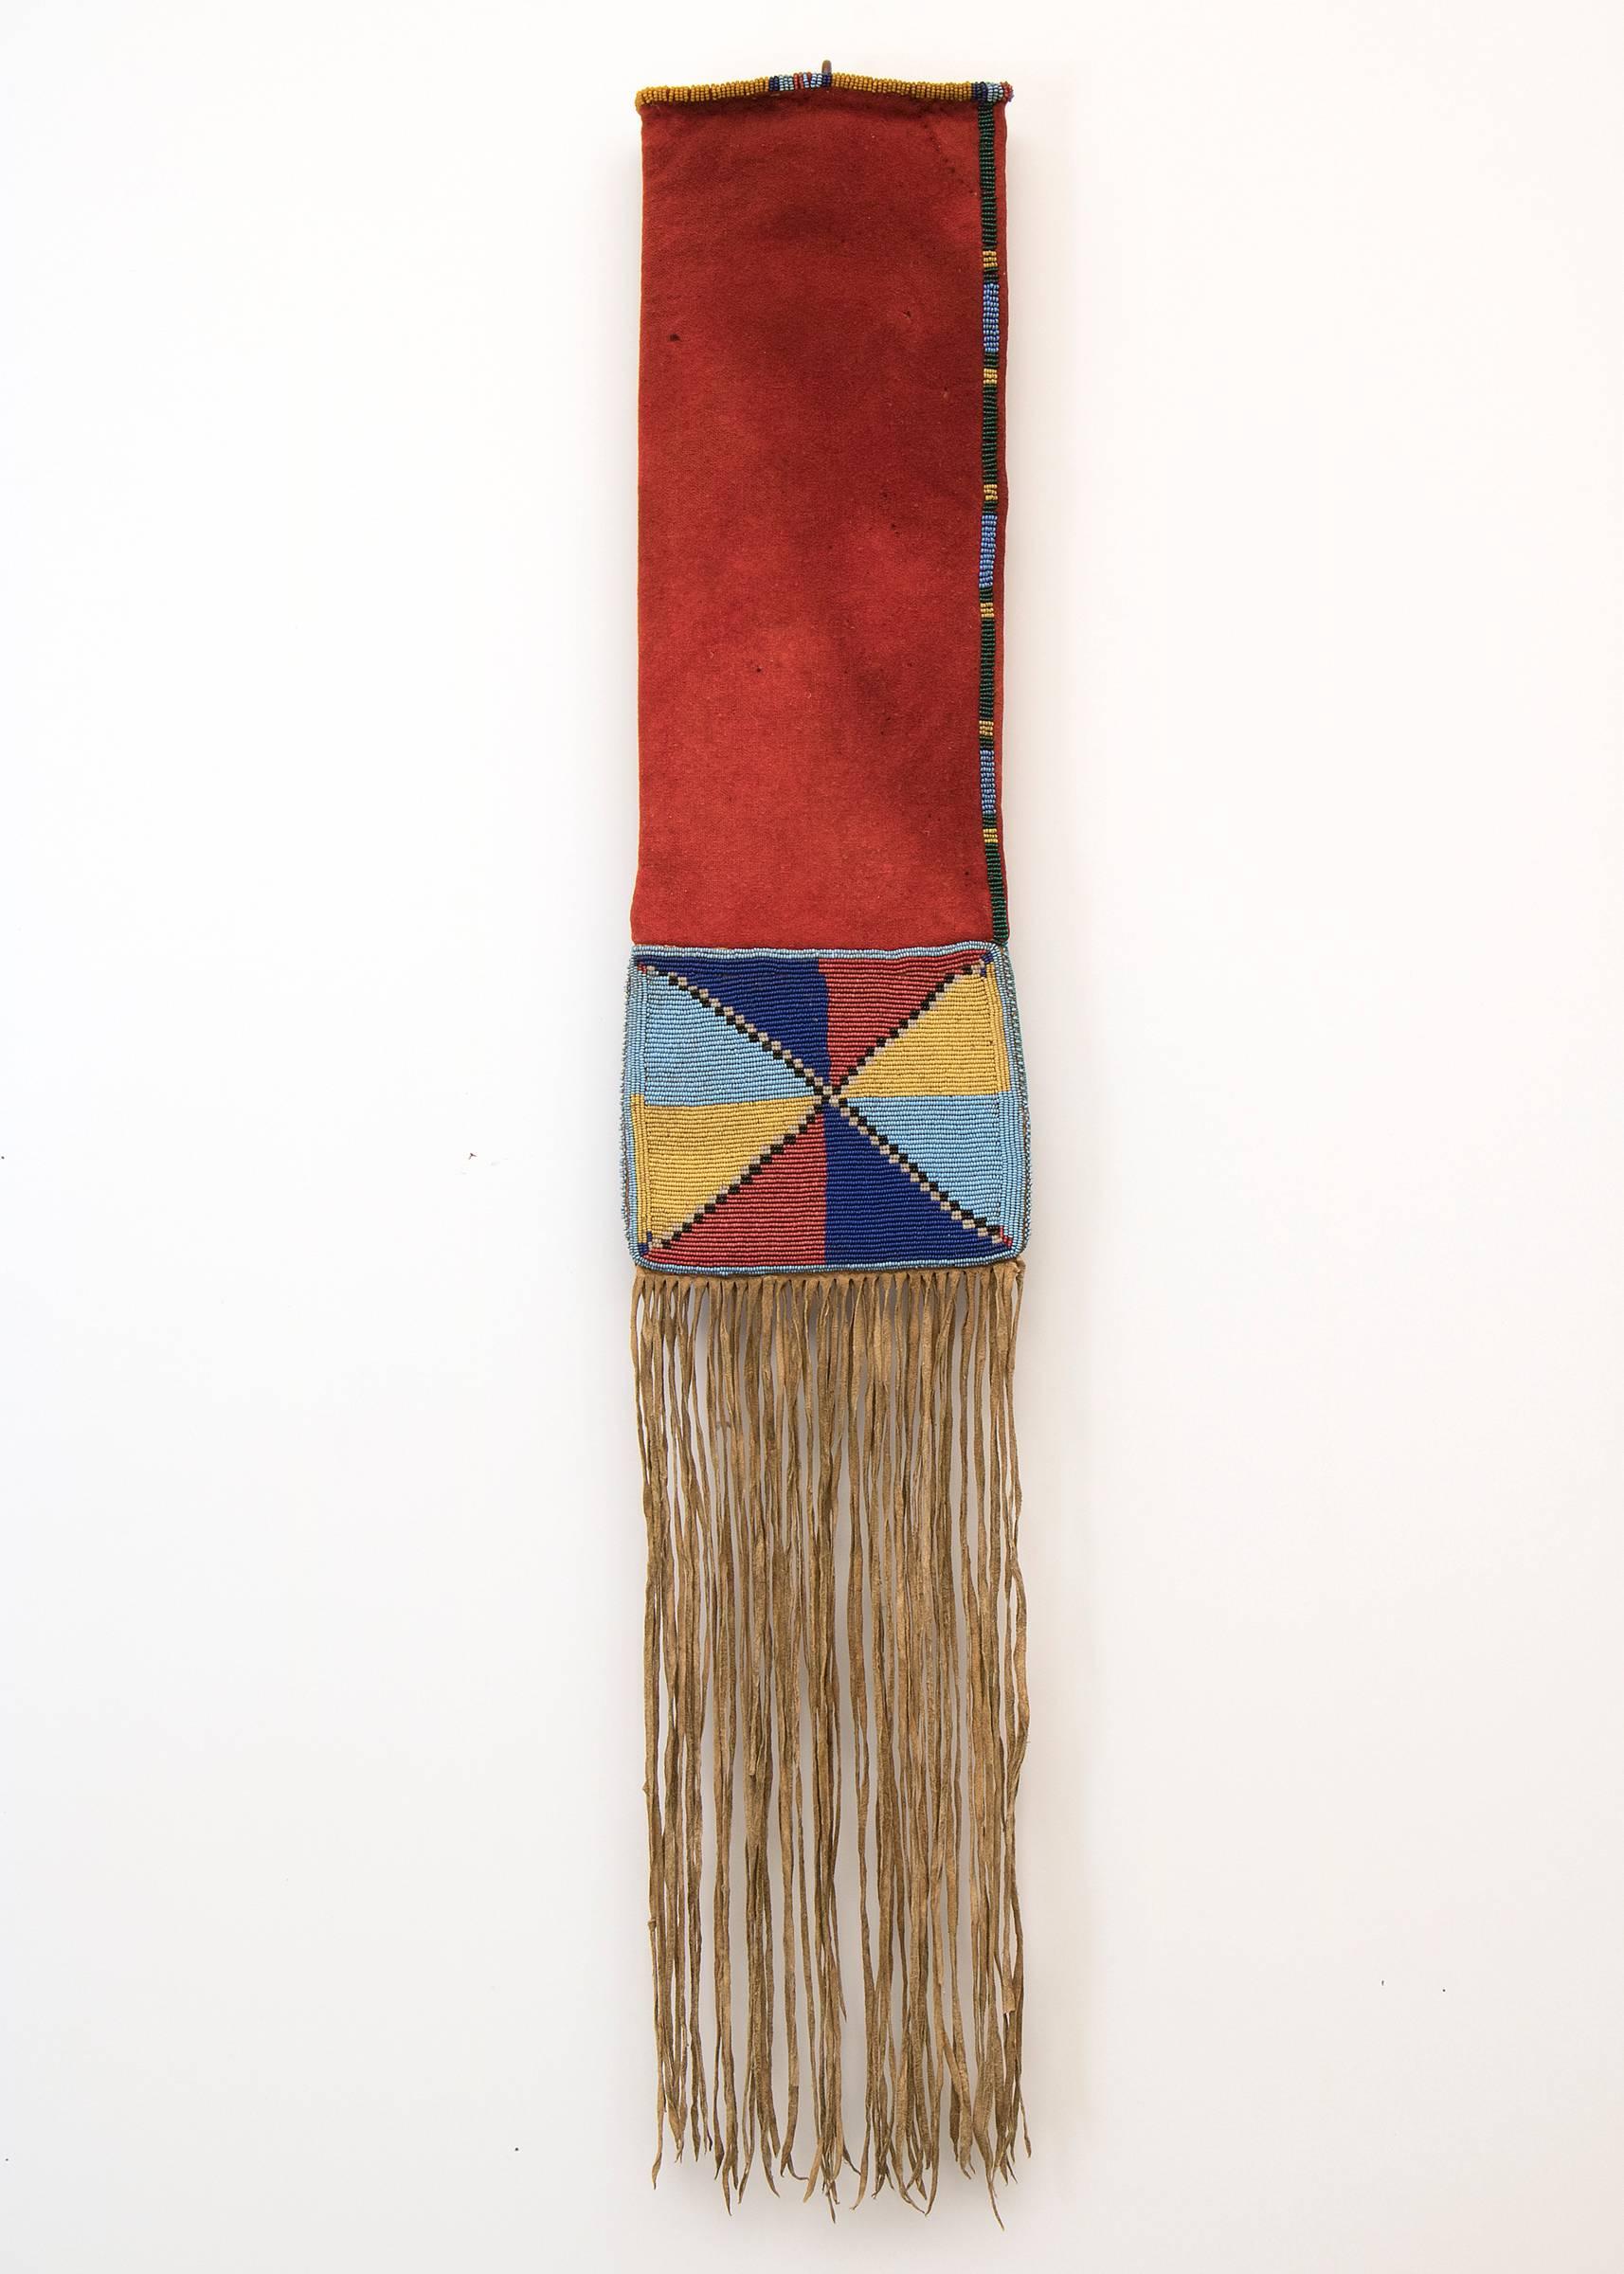 A unique 19th century American Indian pipe bag (tobacco bag). Constructed of red trade cloth with native tanned hide fringe. Intricately beaded different designs on either side.

The Plateau cultural area encompasses portions of what is now